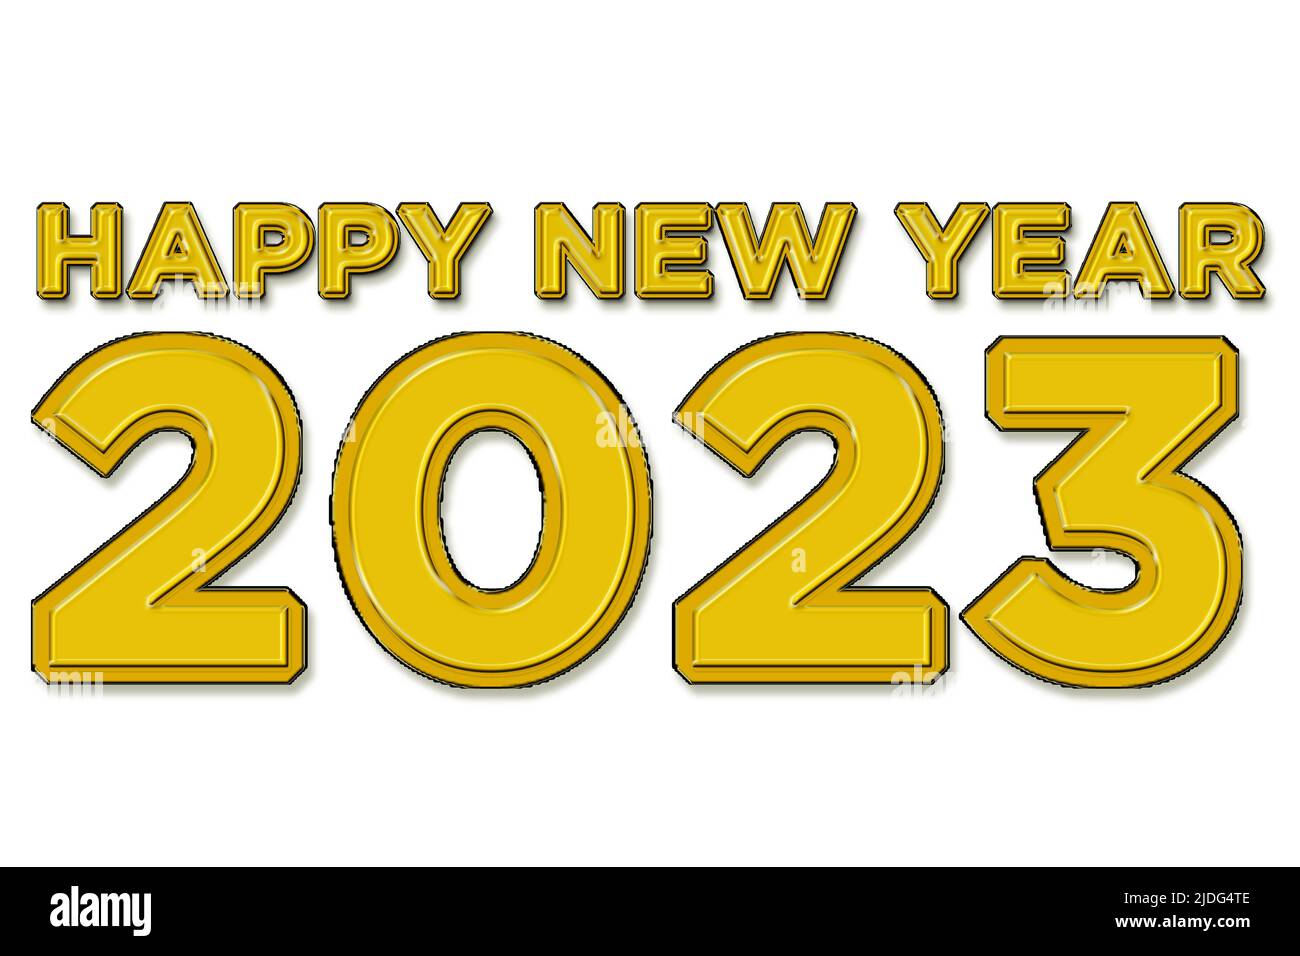 Happy new year 2023 illustration in yellow color text on white background Stock Photo